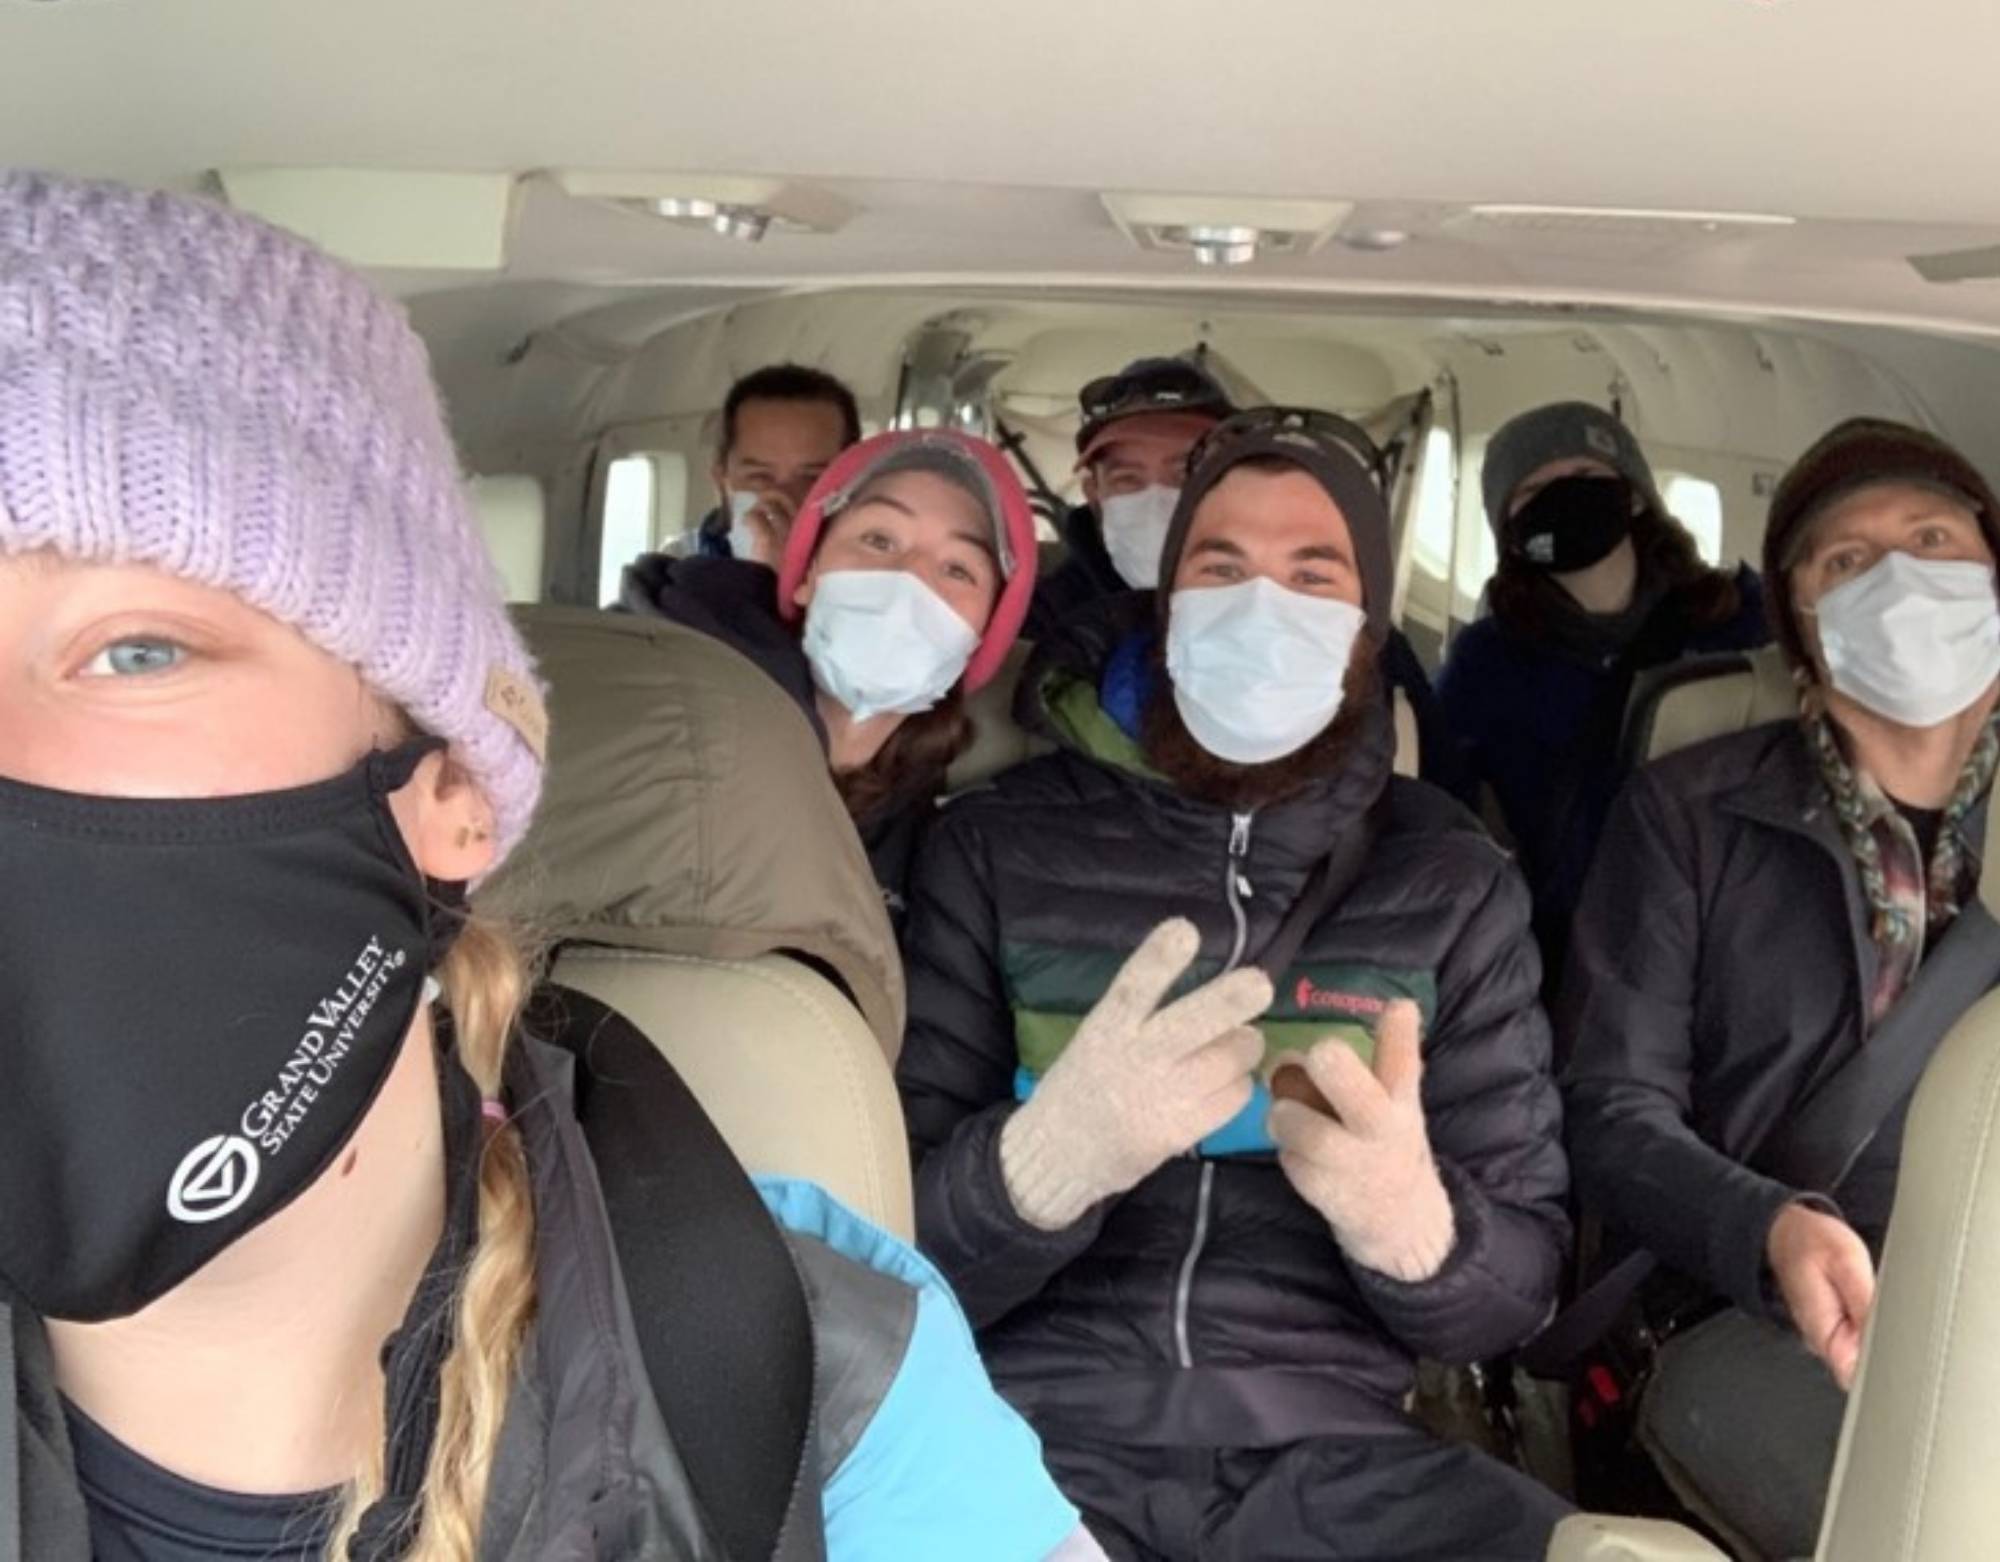 The Utqia&#289;vik crew masks up on a journey to their sites